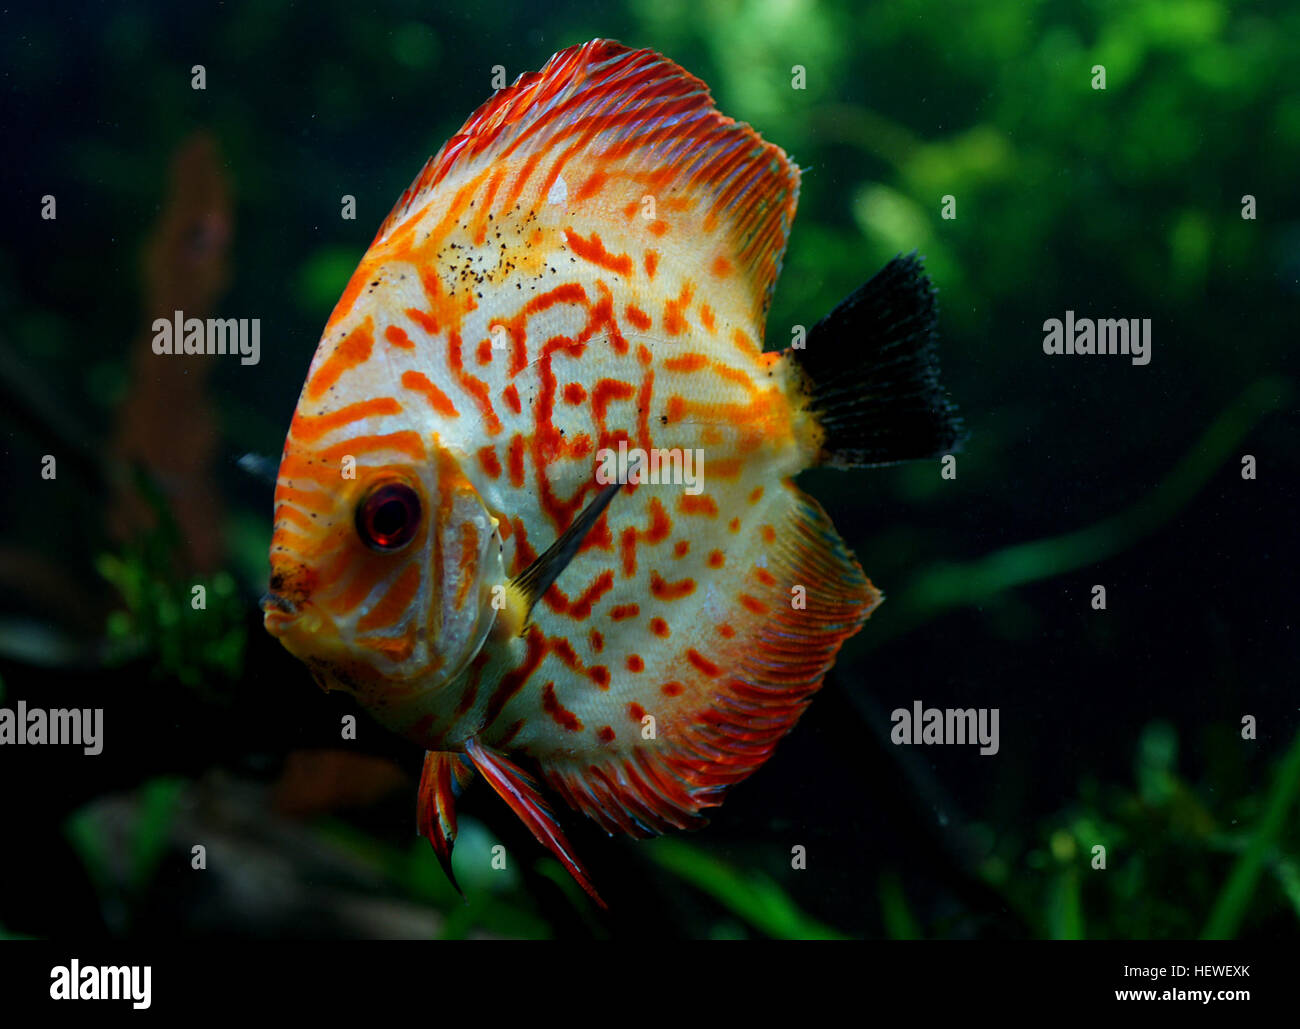 Symphysodon, colloquially known as discus, is a genus of cichlids native to the Amazon River basin. Discus are popular as aquarium fish and their aquaculture in several countries in Asia is a major industr Stock Photo